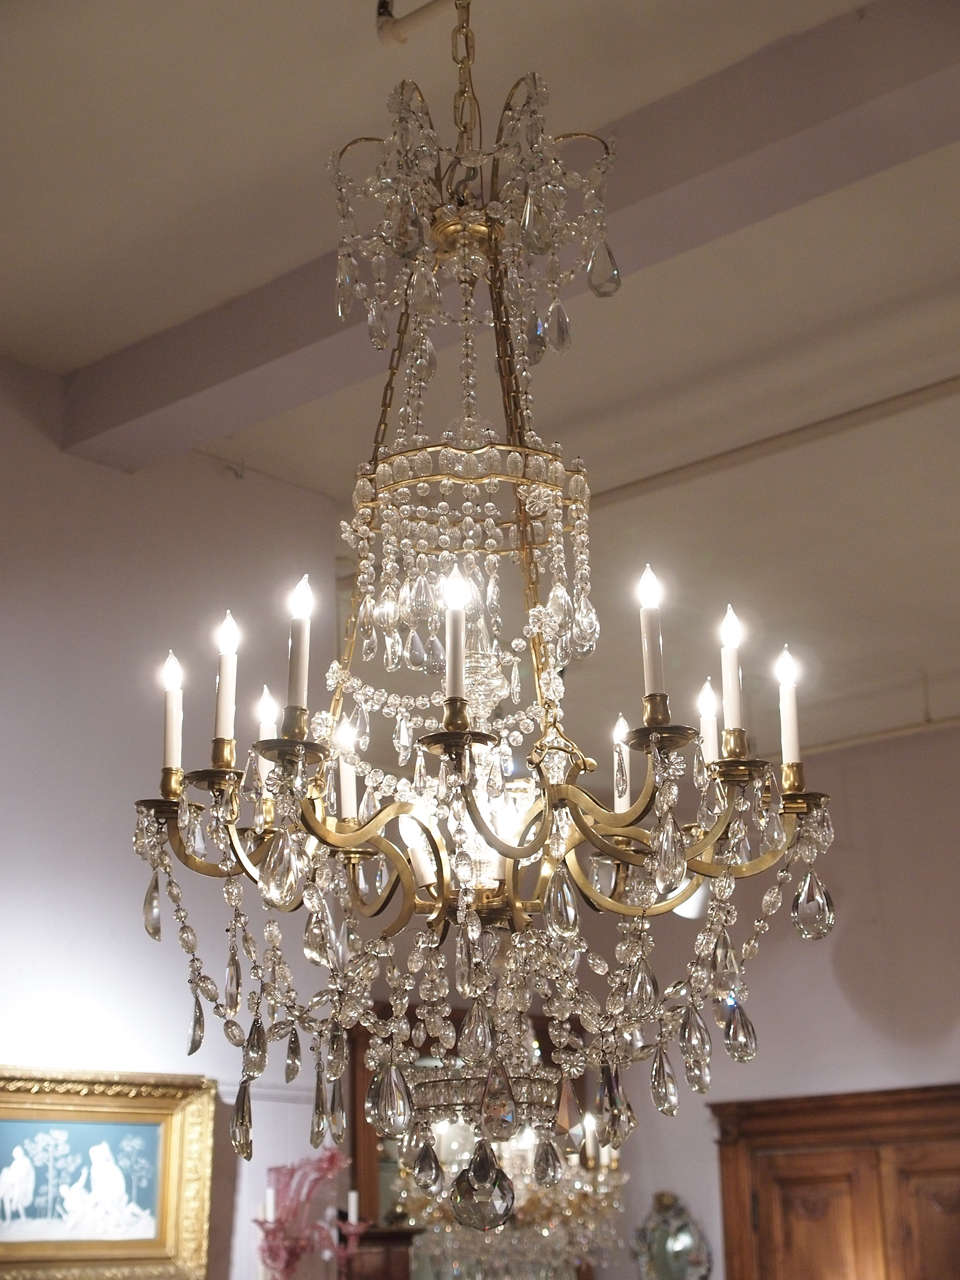 This large, handsome chandelier is very pleasing to the eye, and nicely draped. 